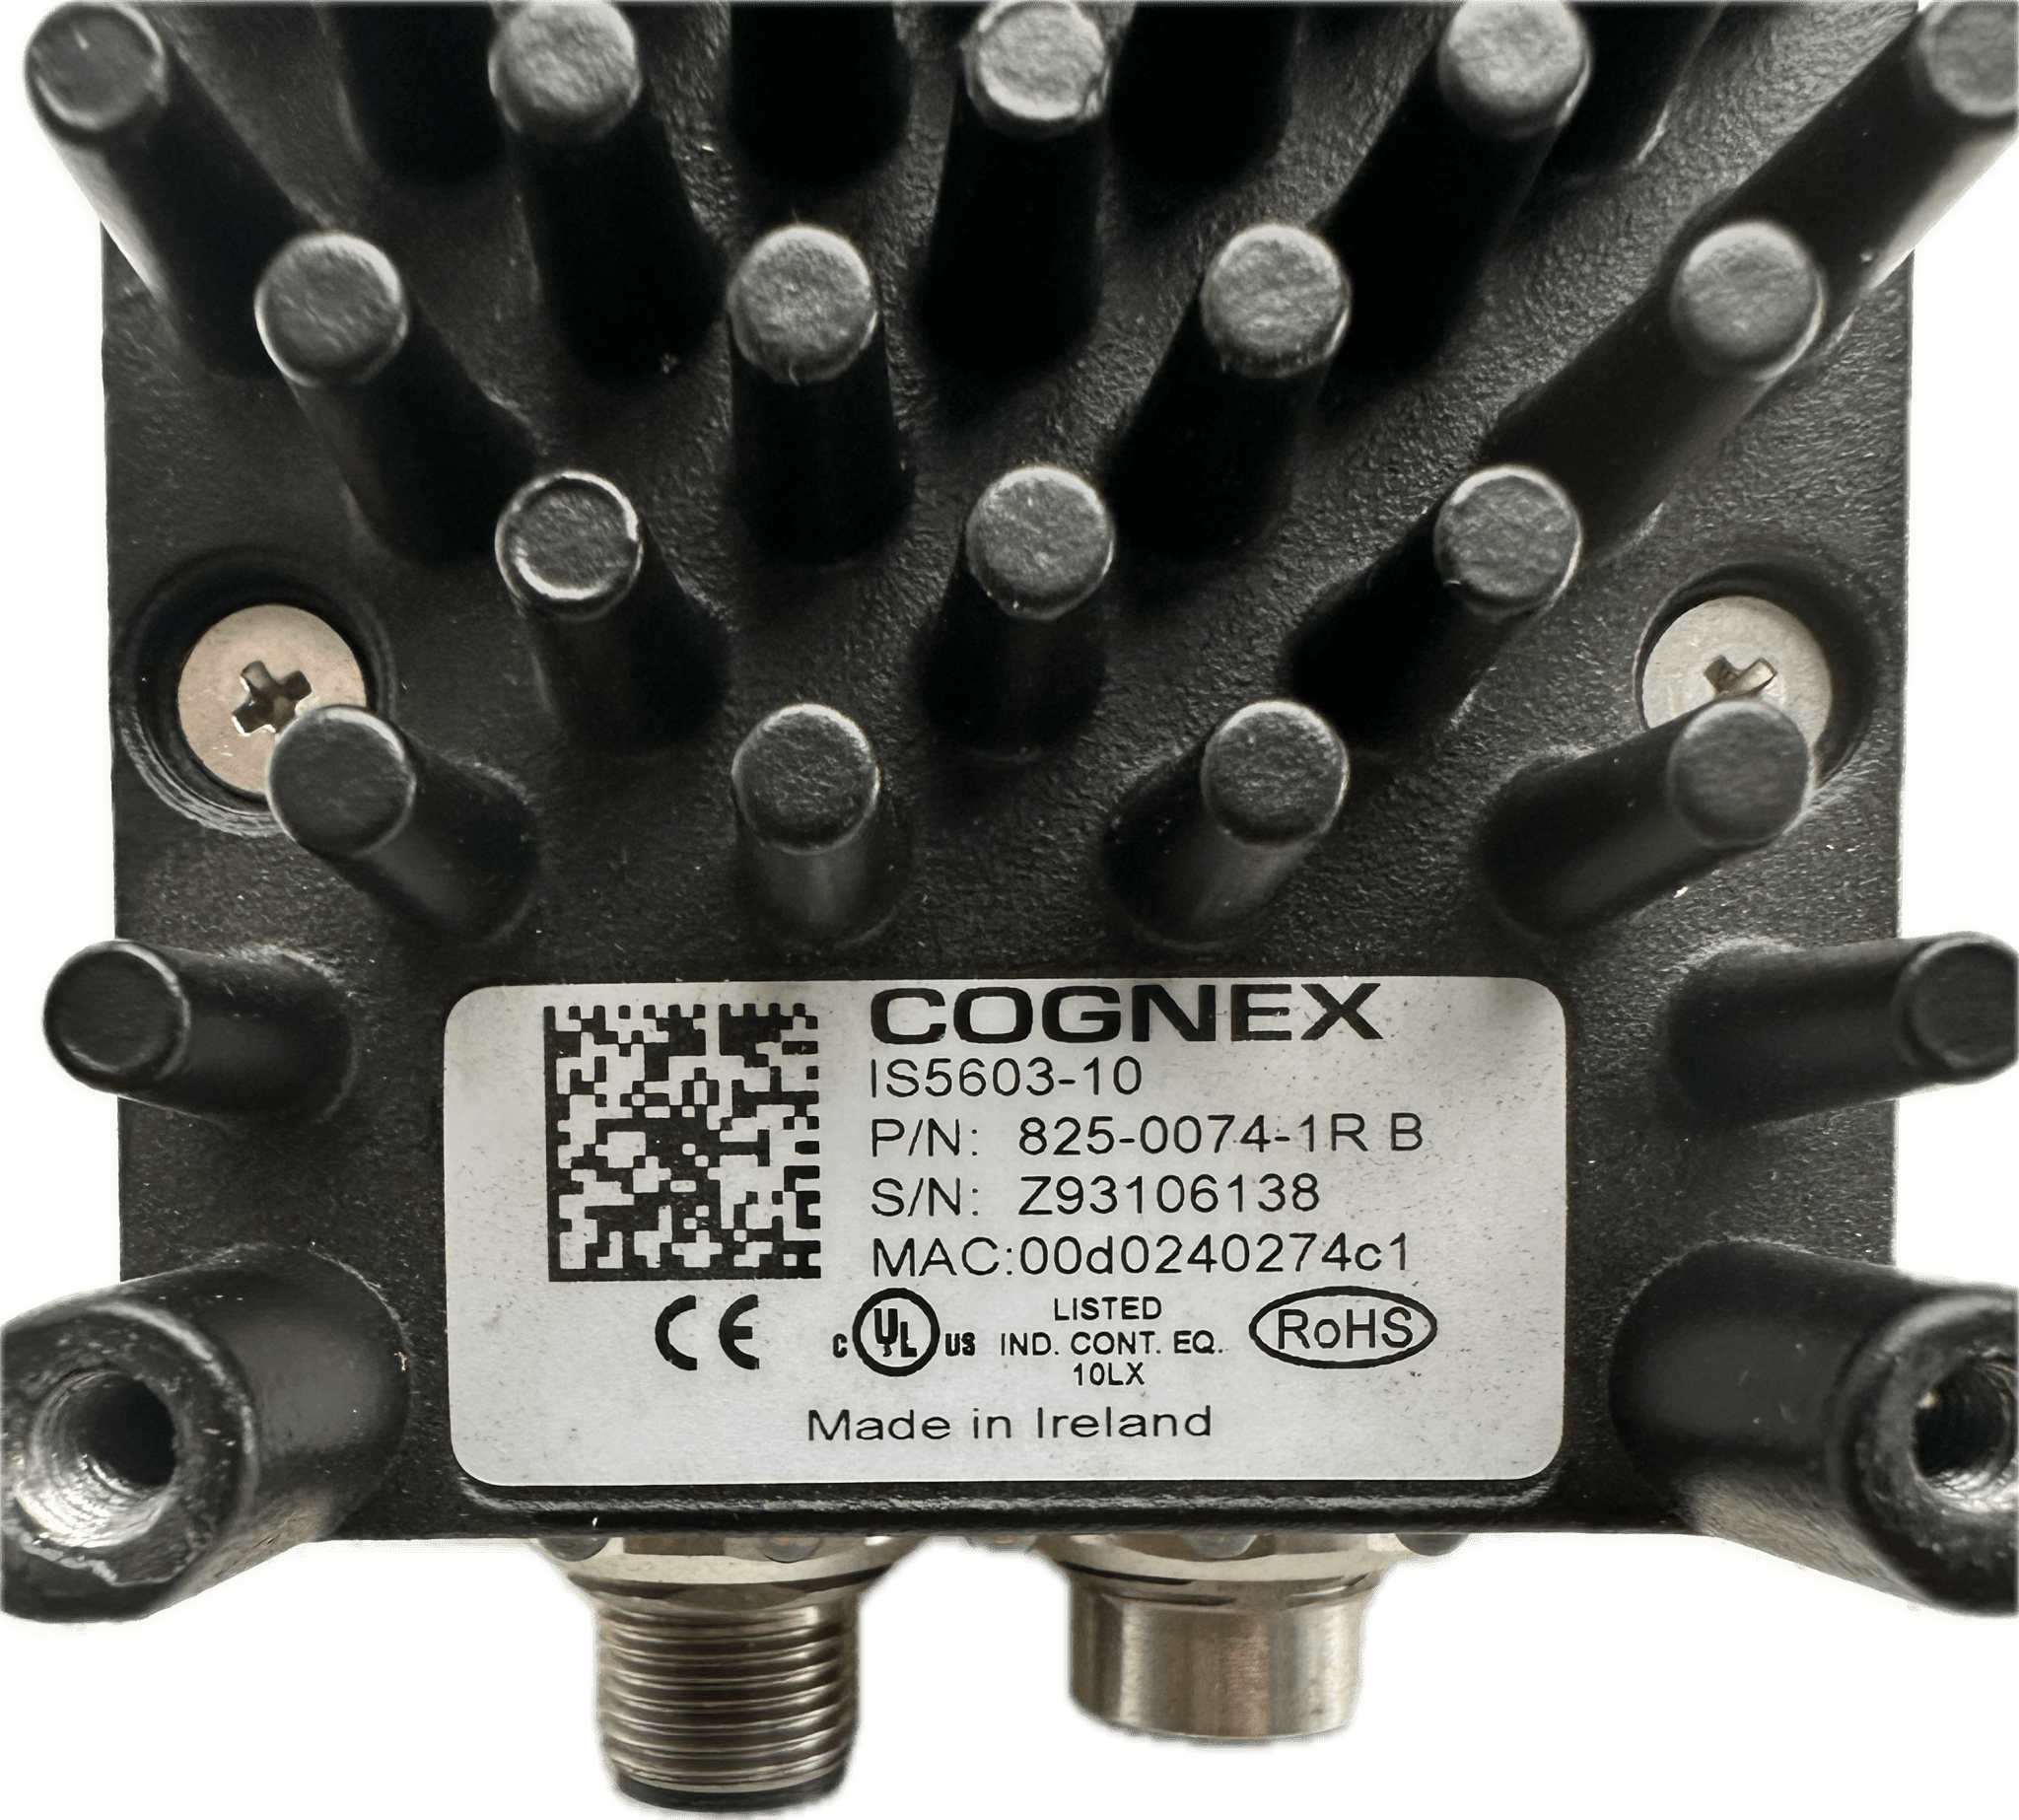 Cognex In-Sight 5603 - #product_category# | Klenk Maschinenhandel